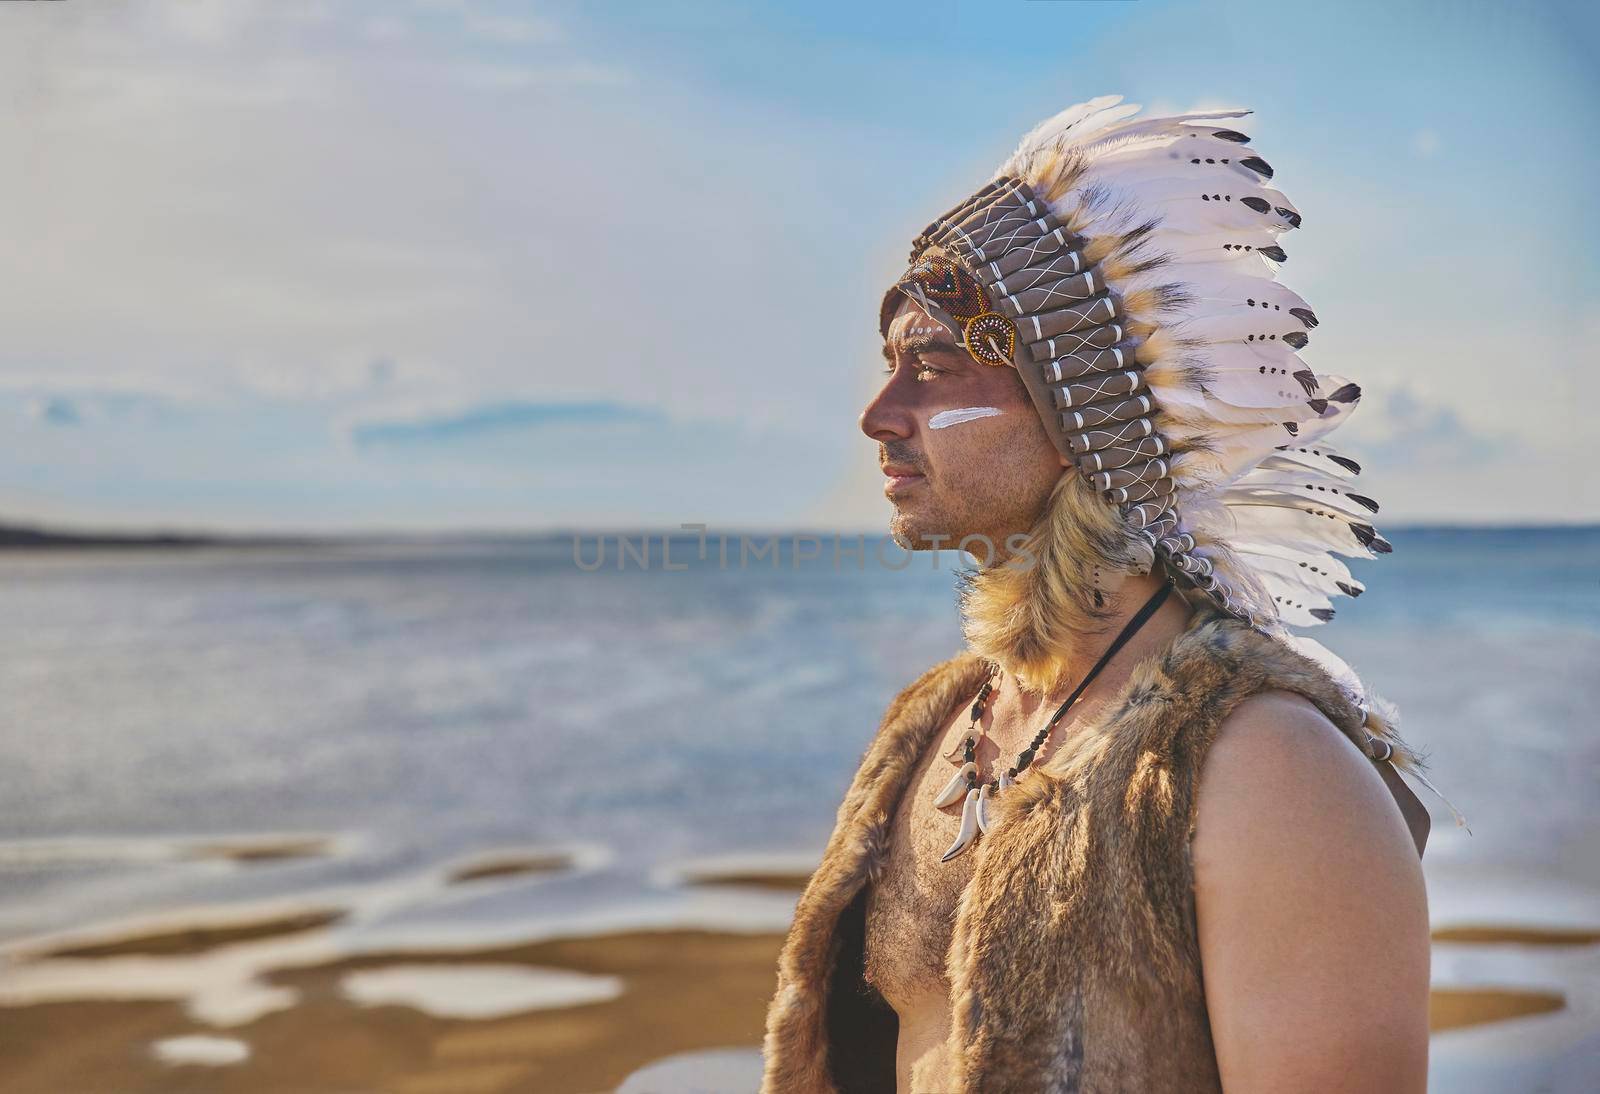 man in traditional Native American clothing near the sea by Viktor_Osypenko